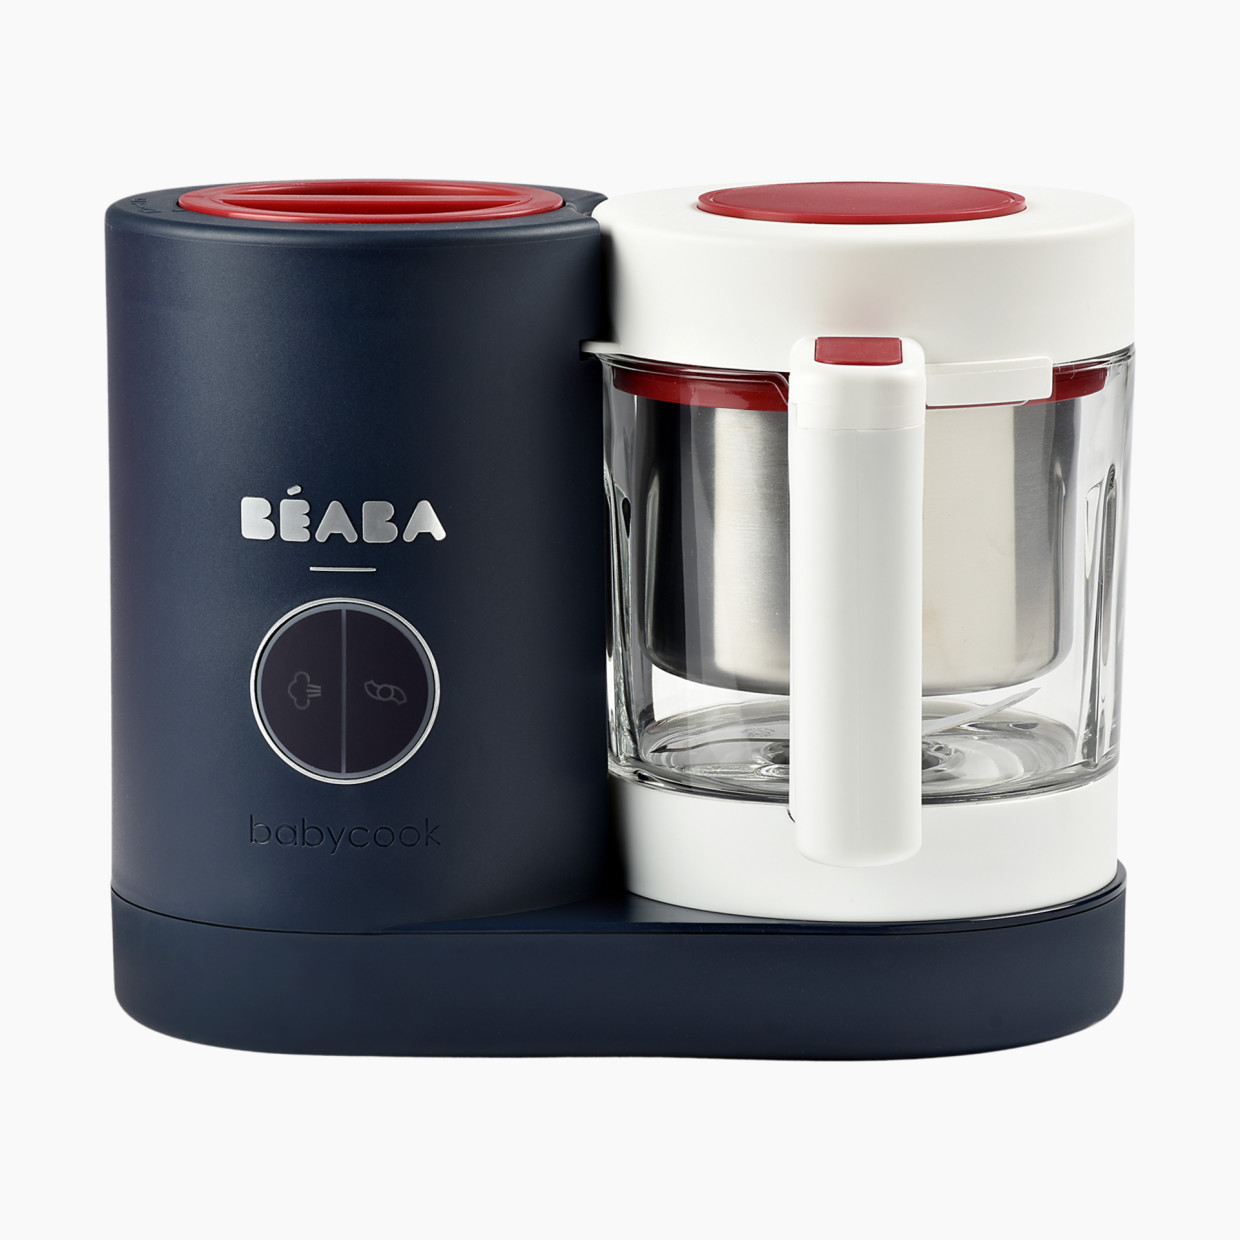 Beaba Babycook Neo Baby Food Maker - French Touch.